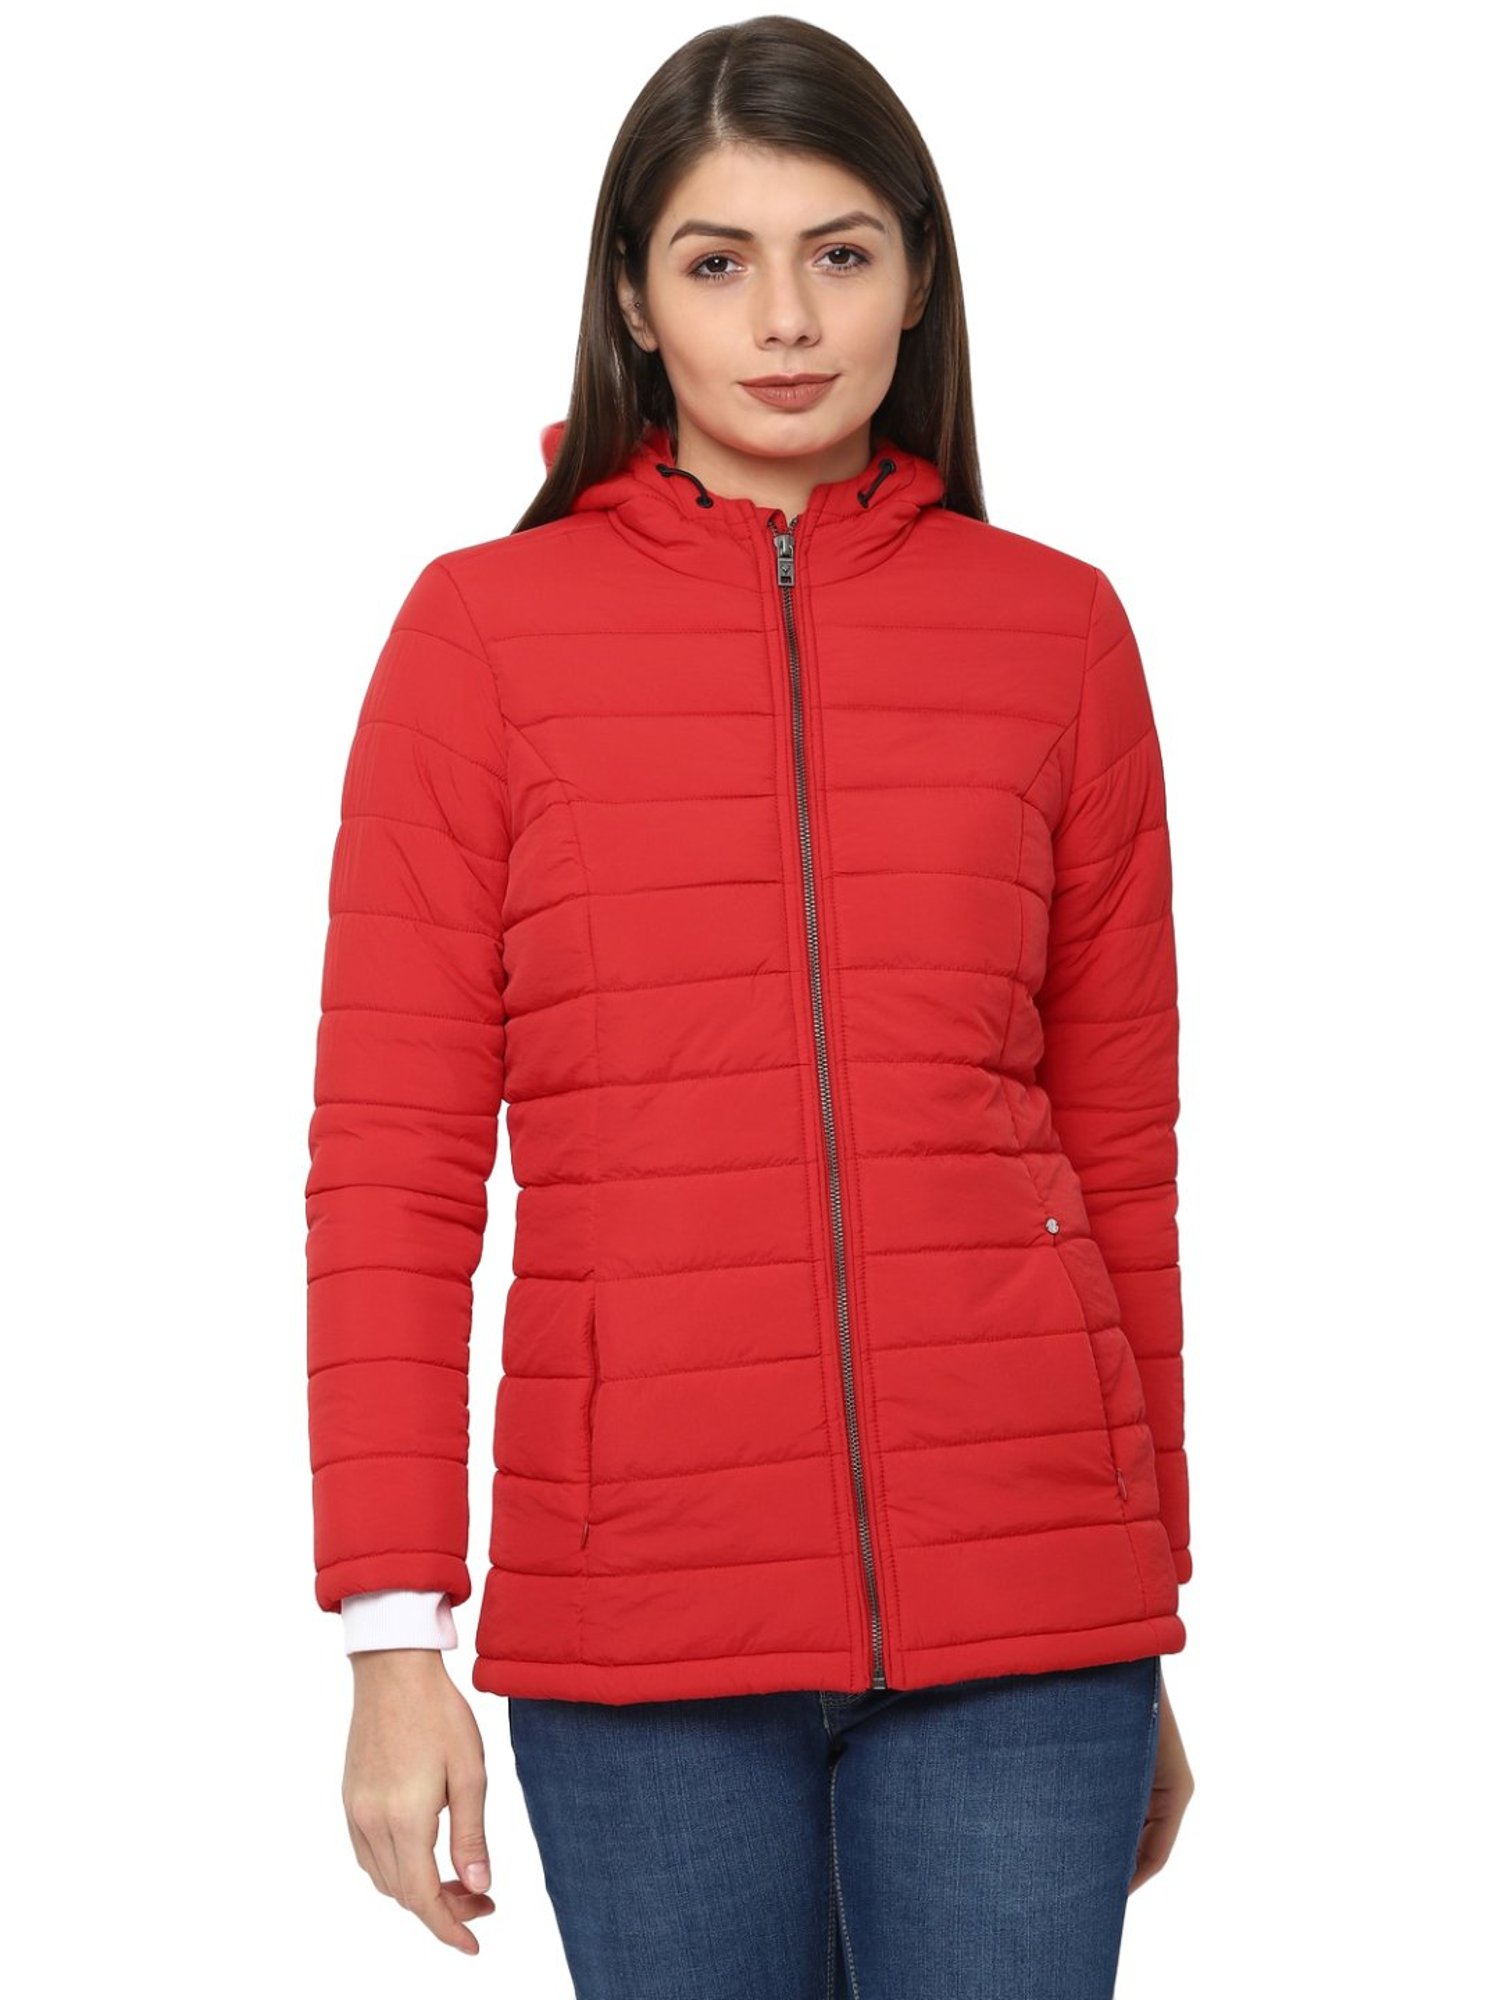 Buy Allen Solly Women Solid Regular Jacket - Black Online at Low Prices in  India - Paytmmall.com